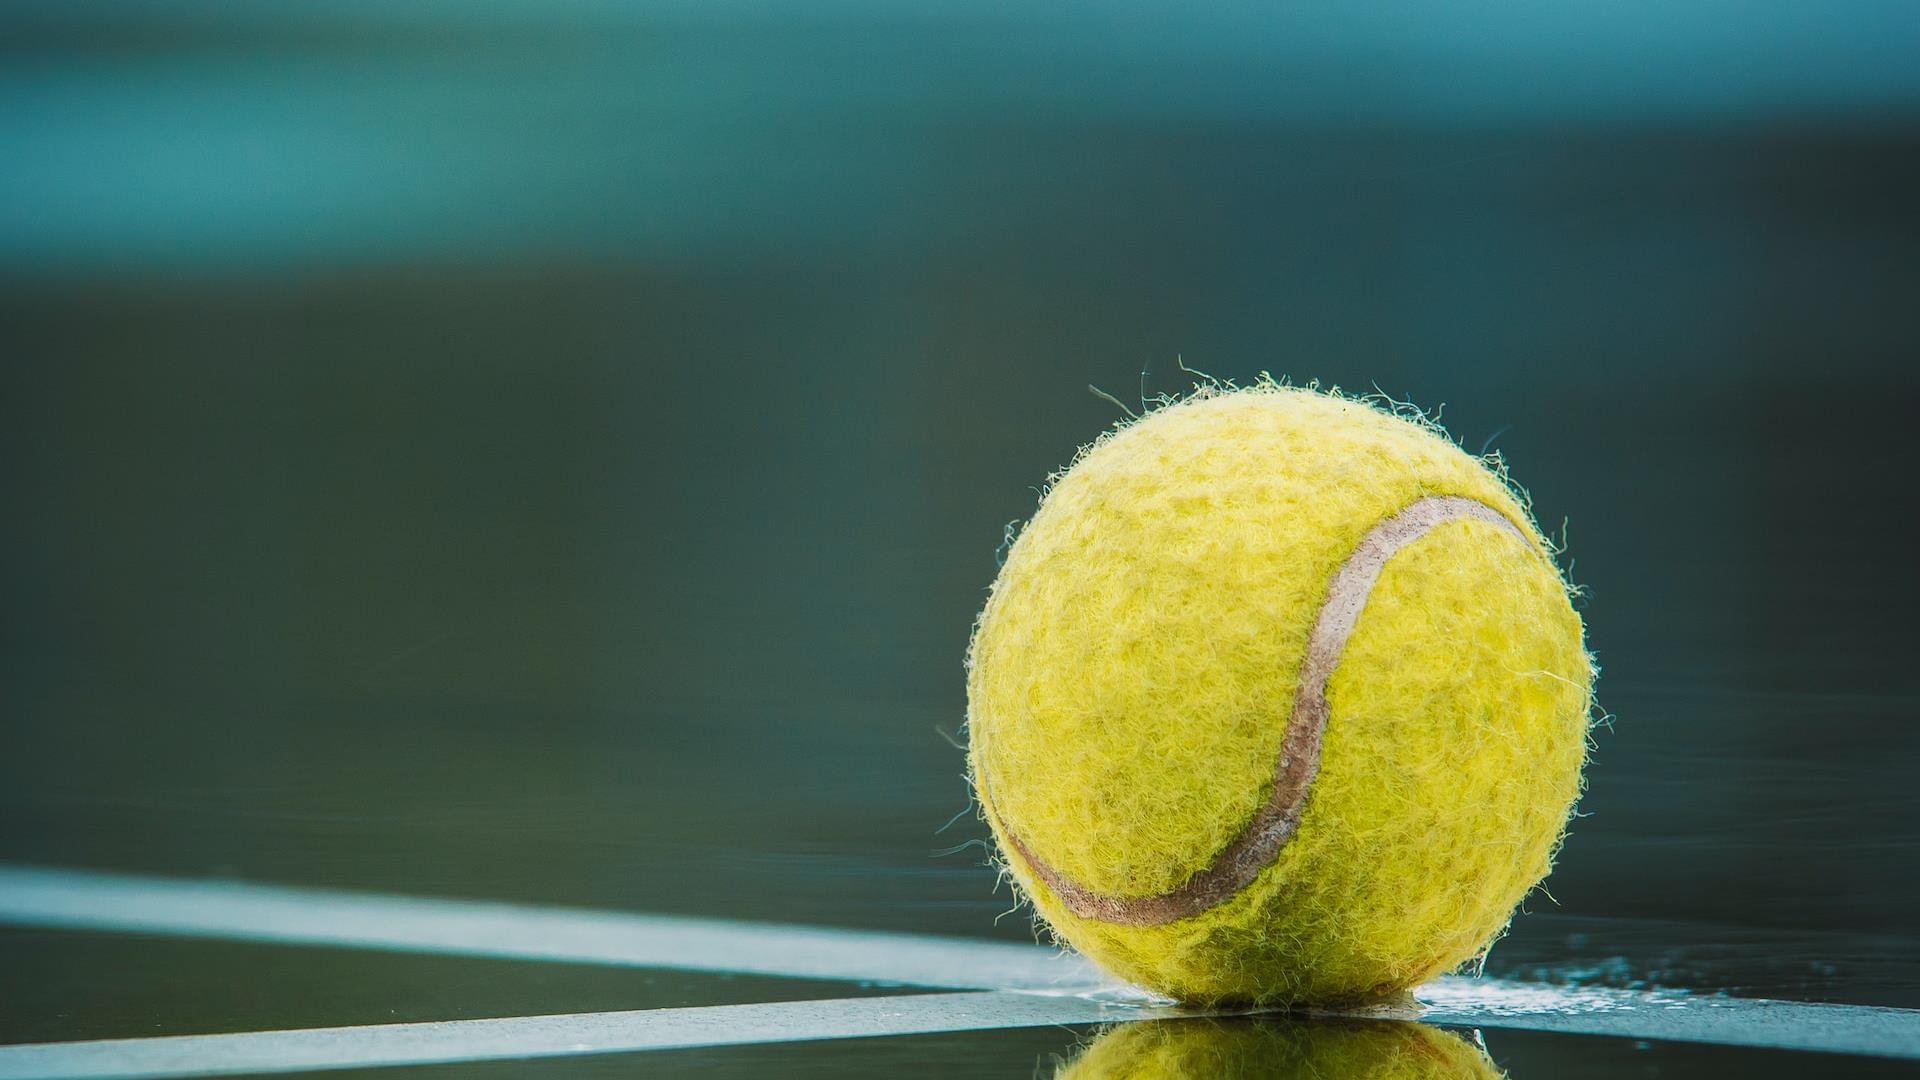 Tennis ball on white line reflected in water with blue background